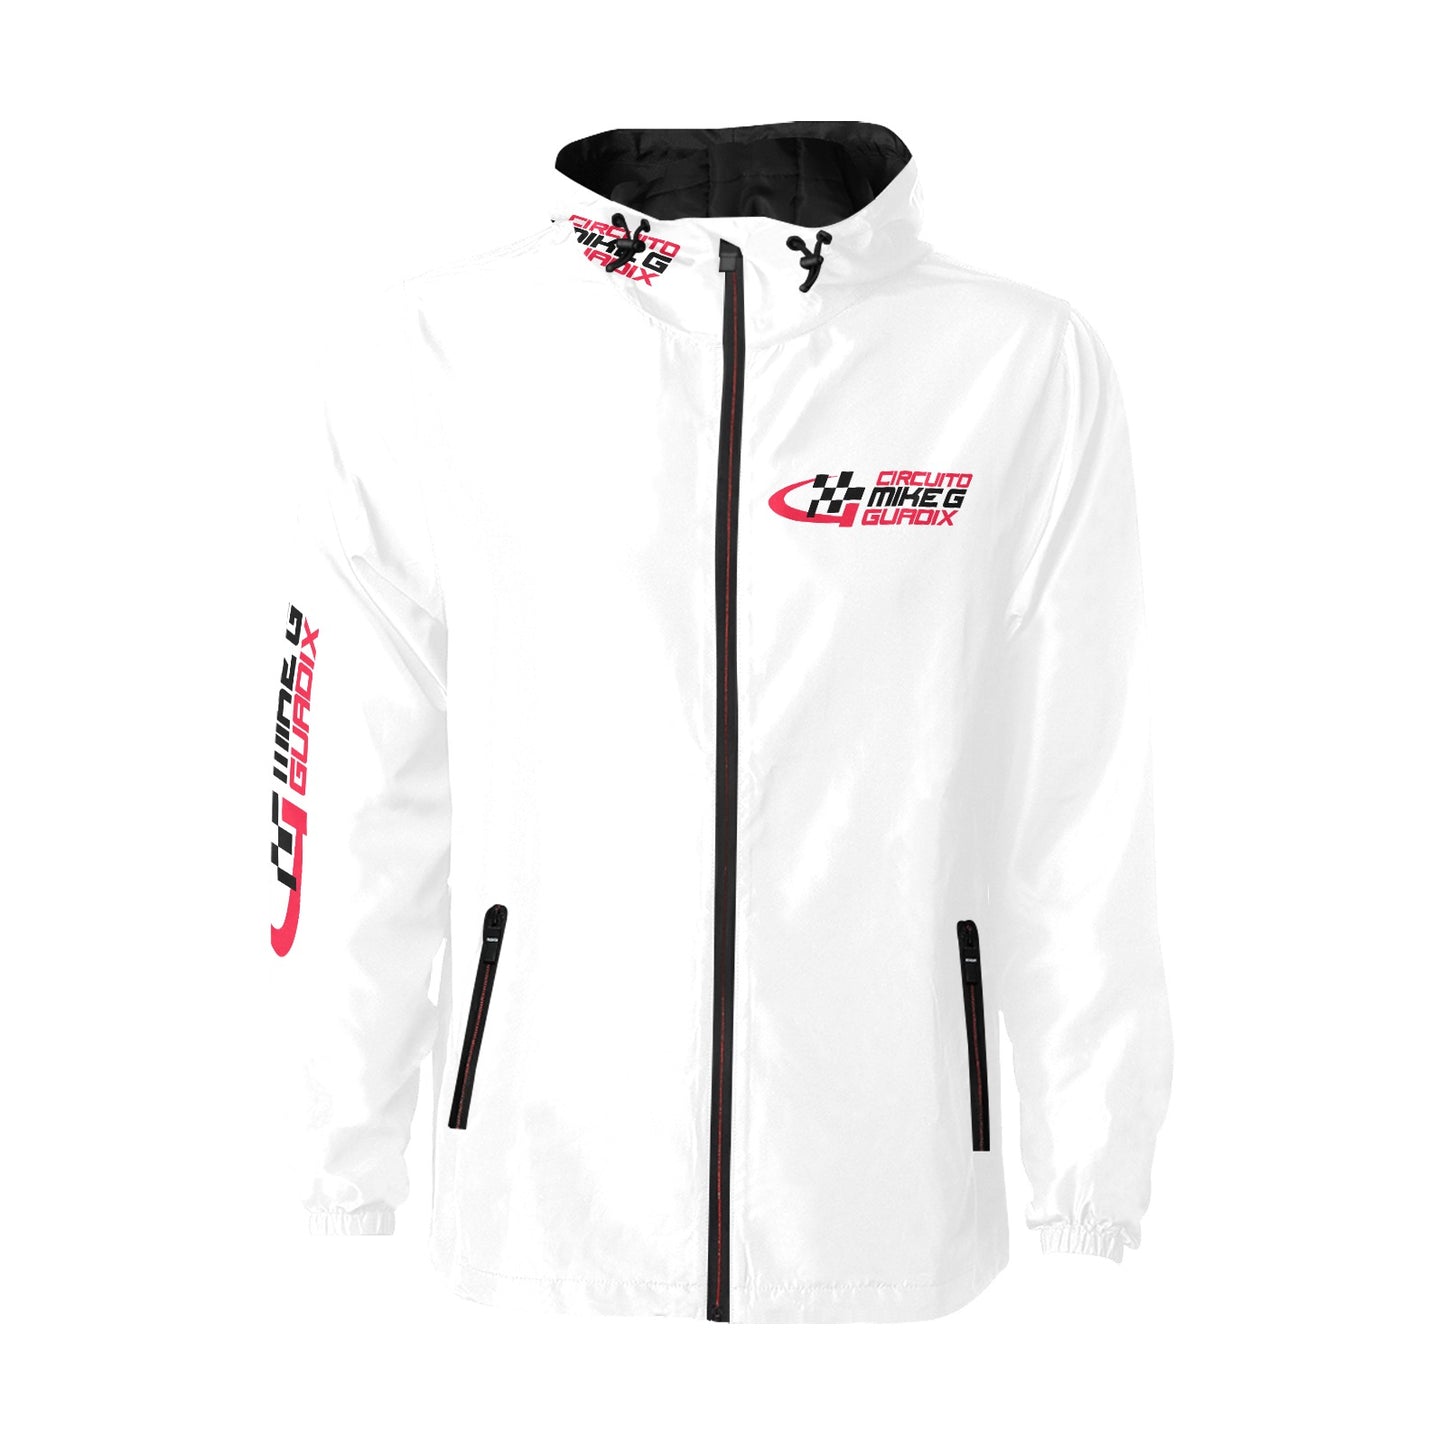 CIRCUITO MIKE G GUADIX Quilted Windbreaker jacket - circuit white